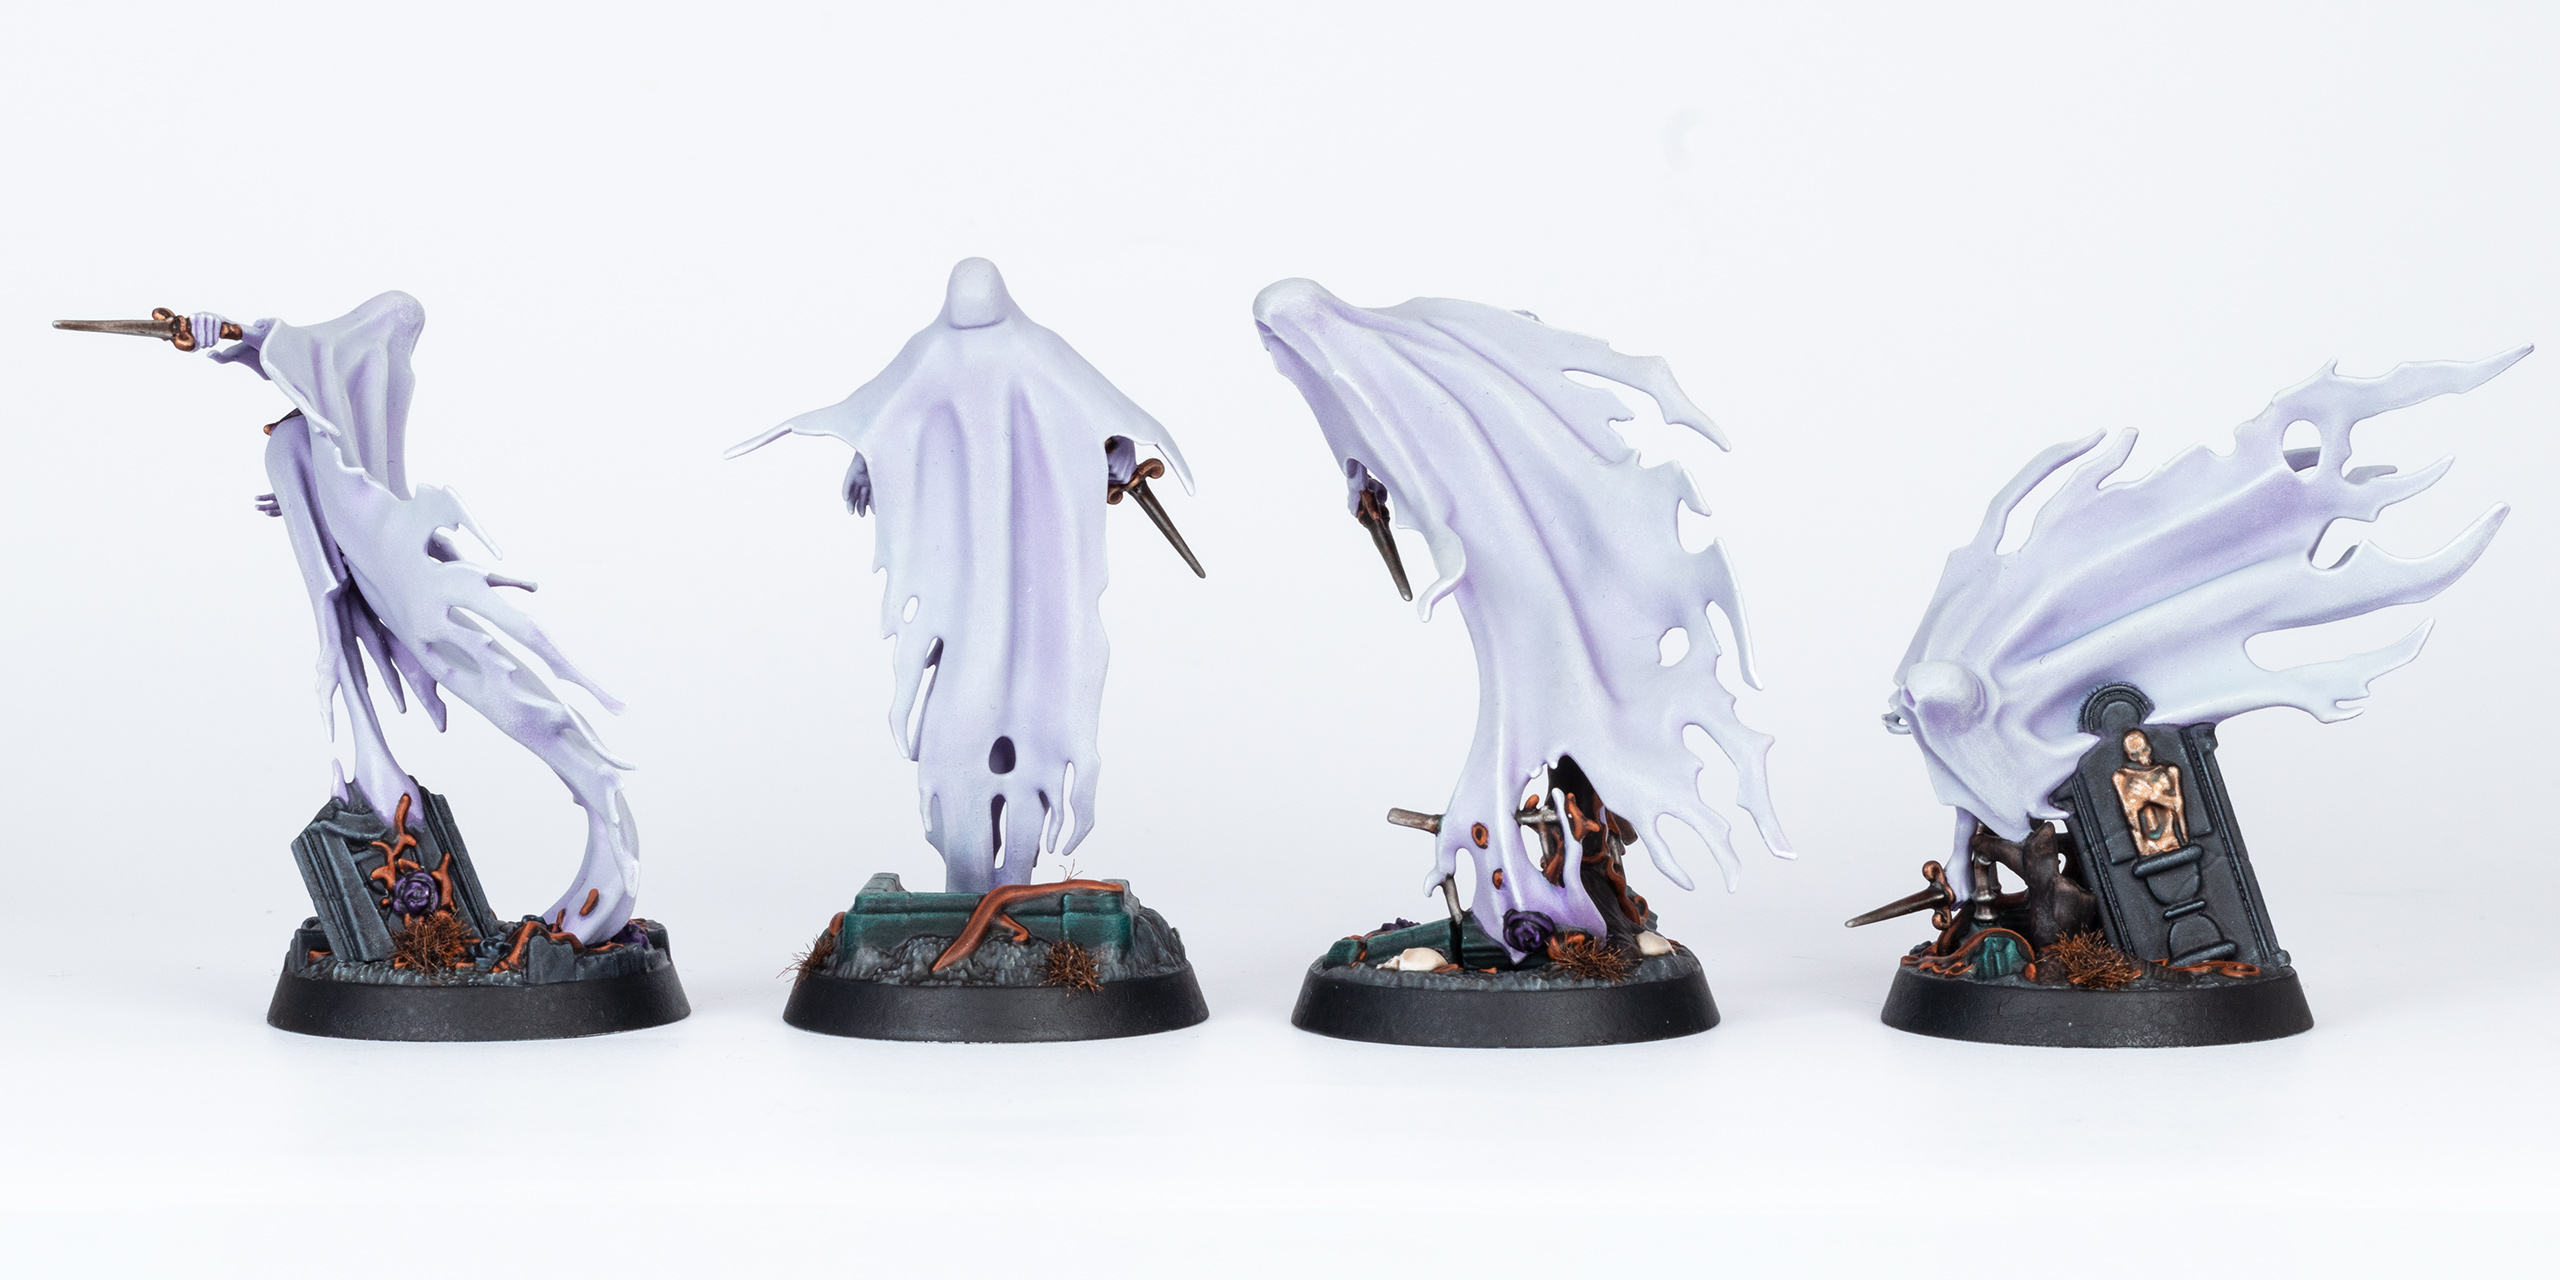 Myrmourn Banshees painted by Stahly, back